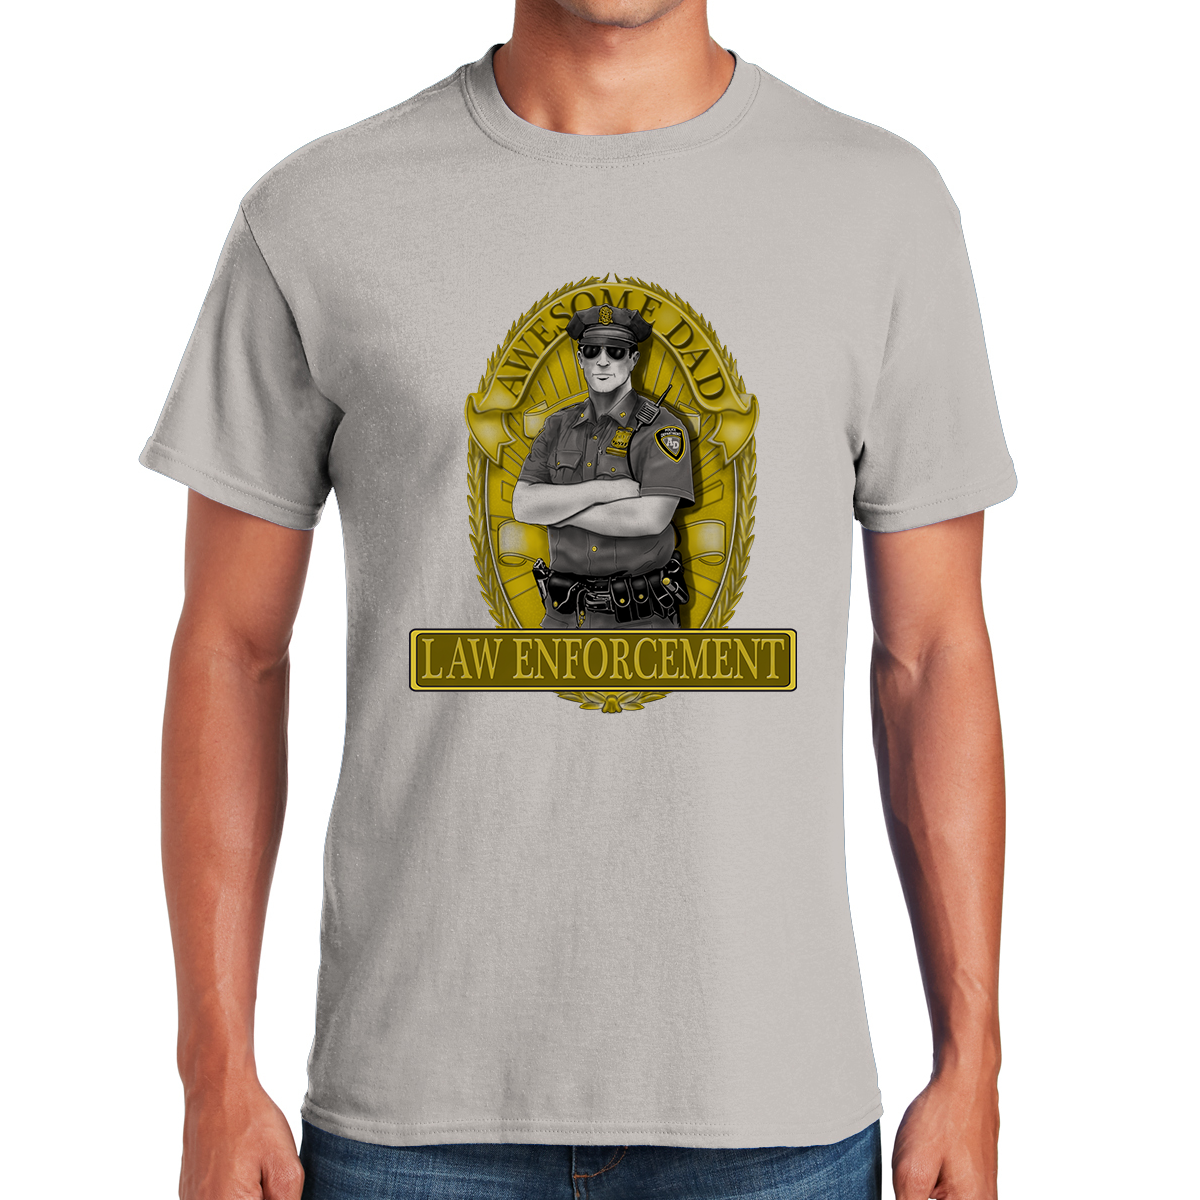 Awesome Dad In Law Enforcement Protecting The Community Nurturing The Family Gift For Dads T-shirt